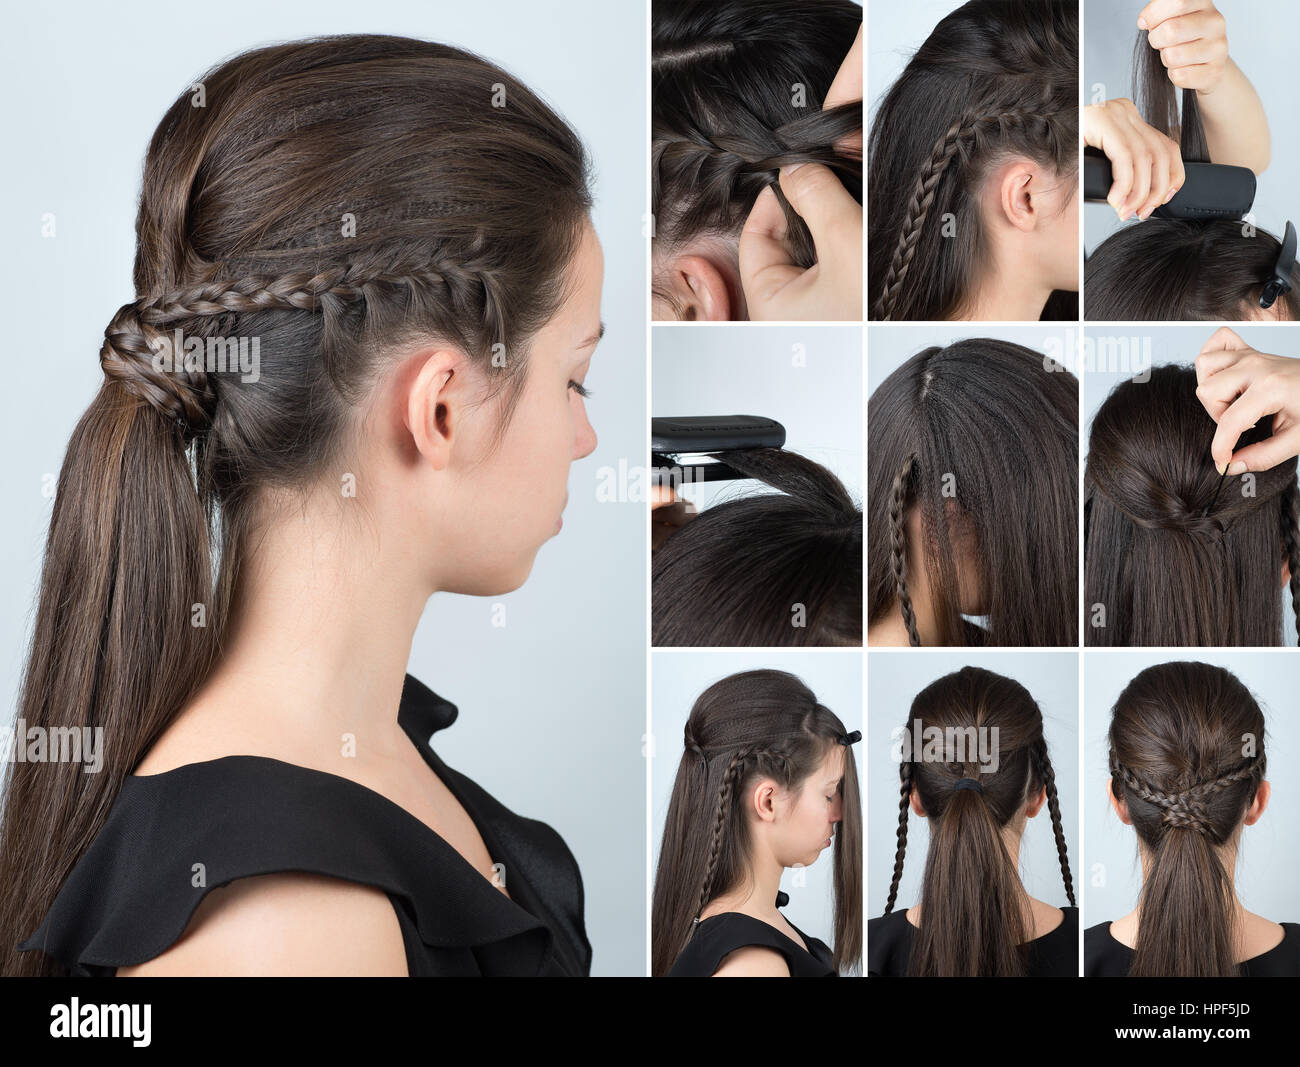 volume hairstyle ponytail with plait tutorial. Hairstyle for long hair. Hairstyle tutorial Stock Photo